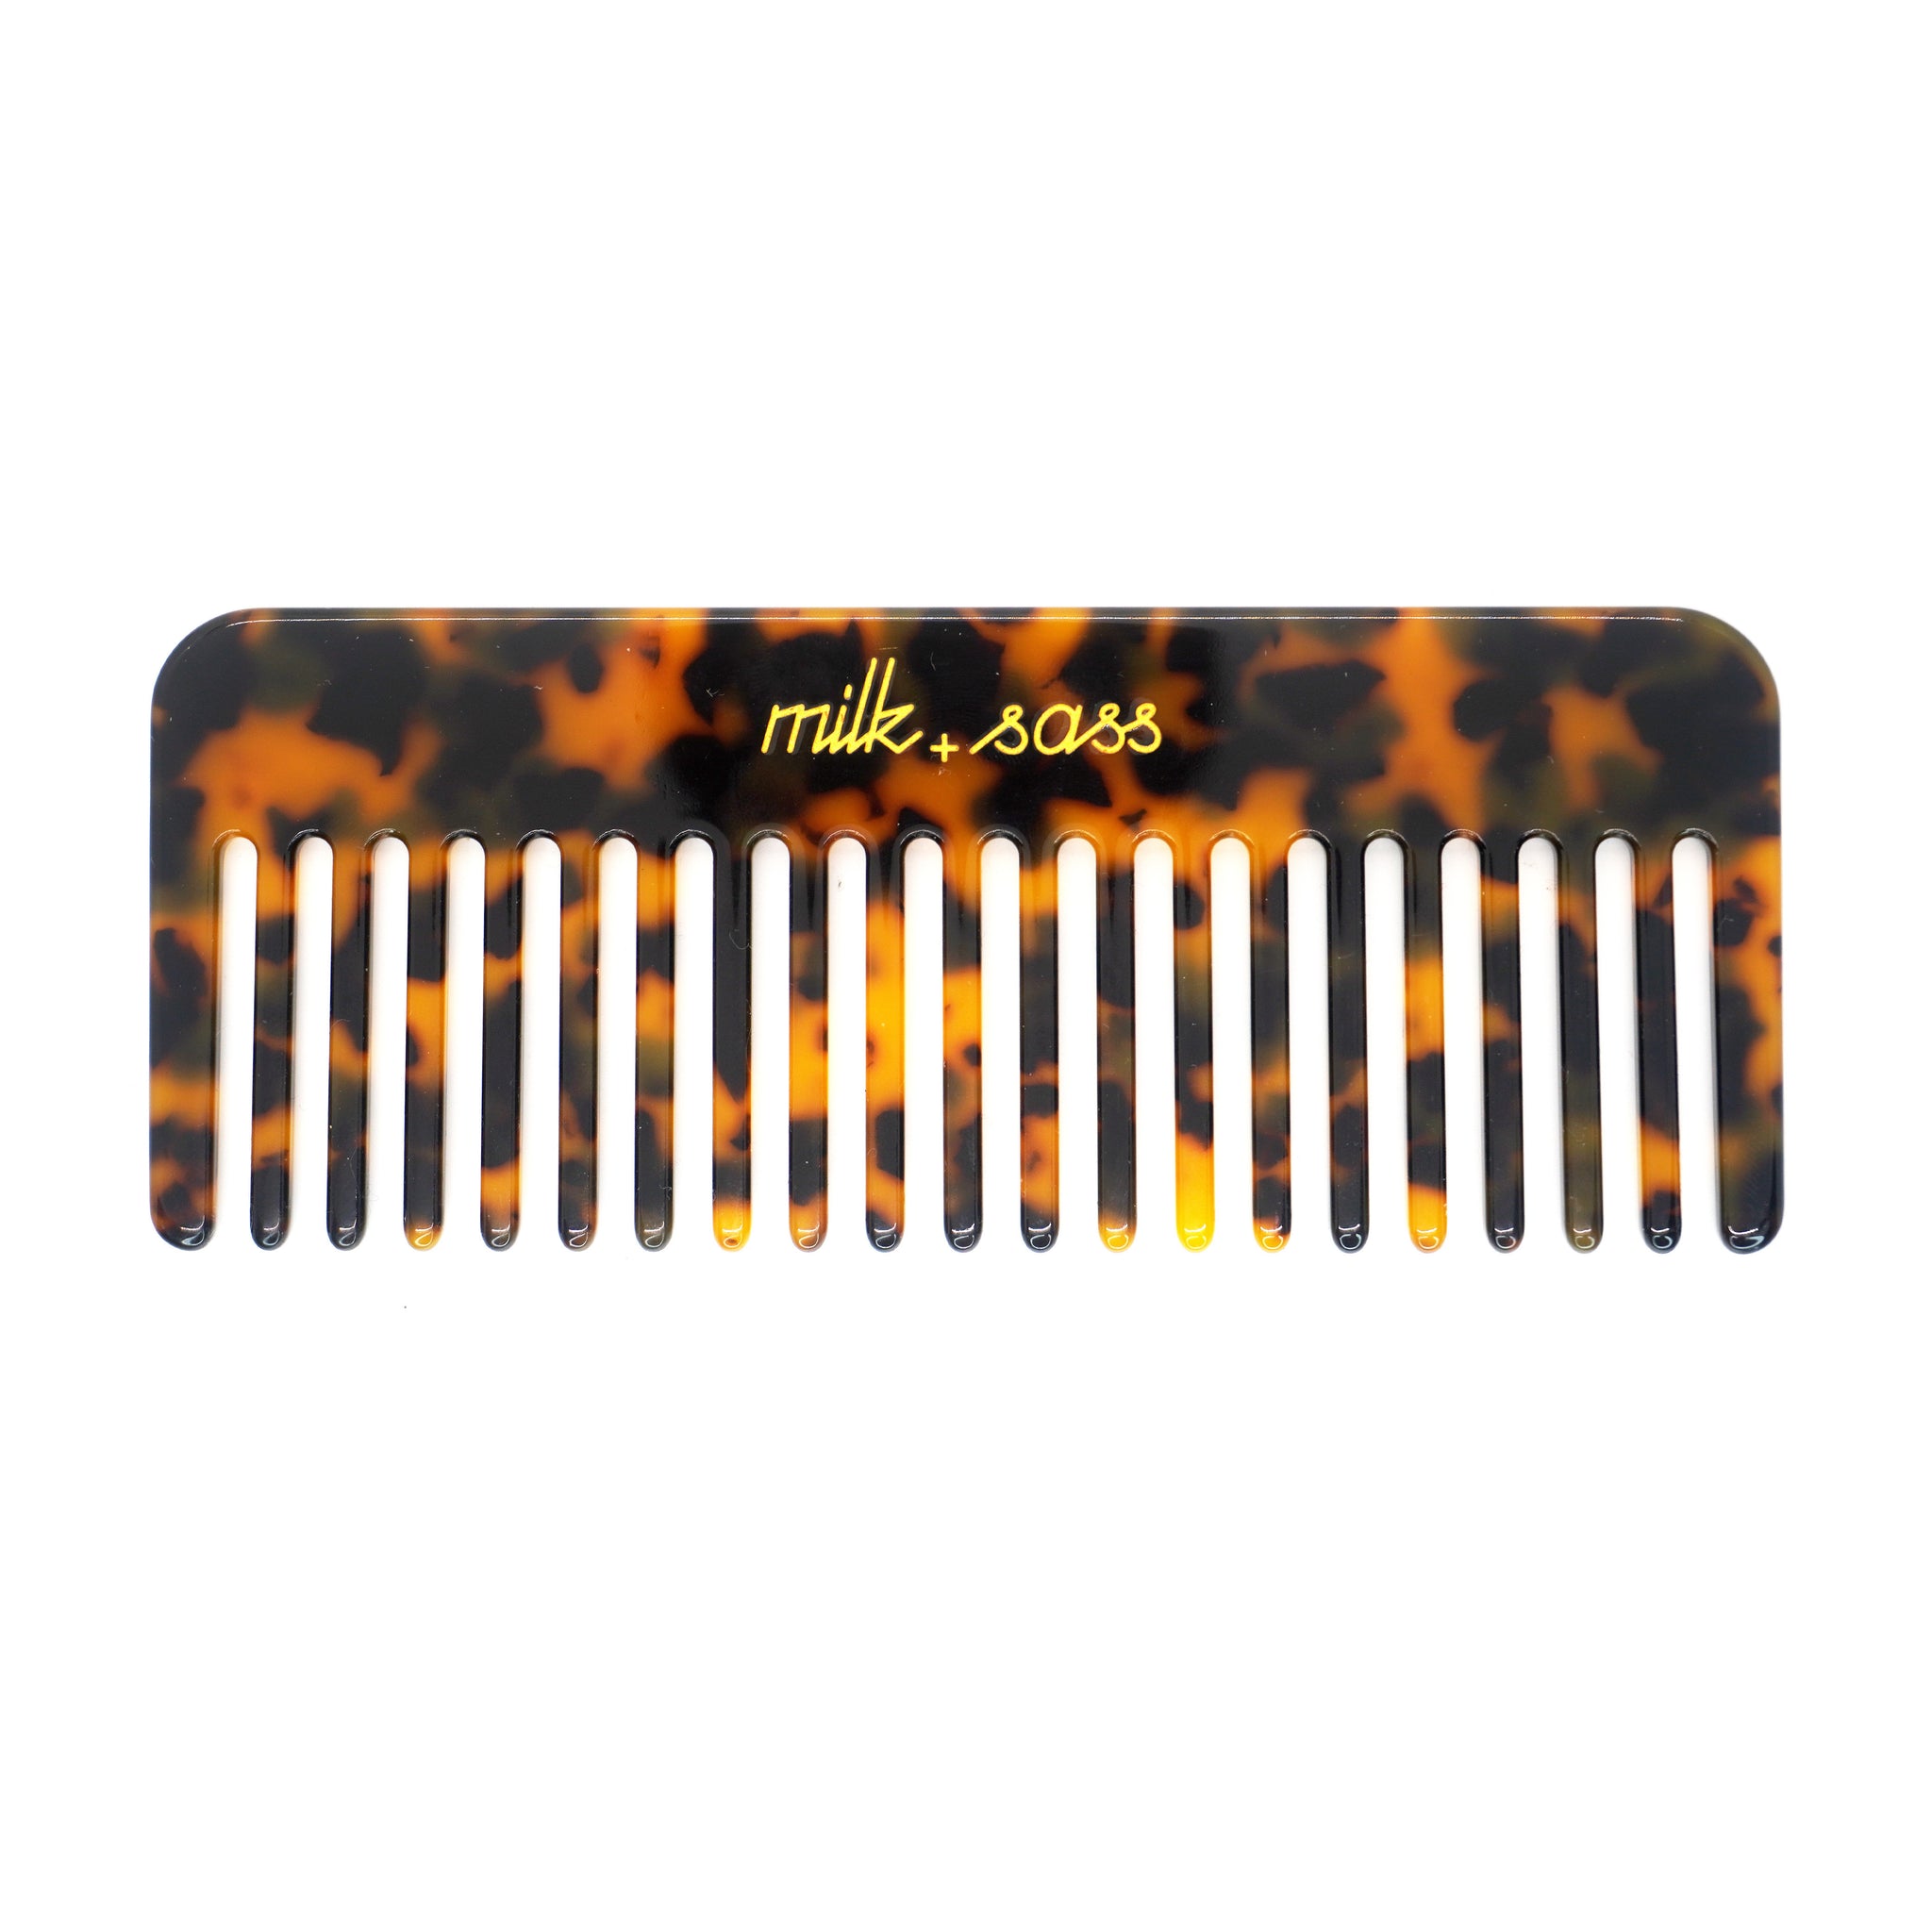 Extra Large Detangling Wooden Comb